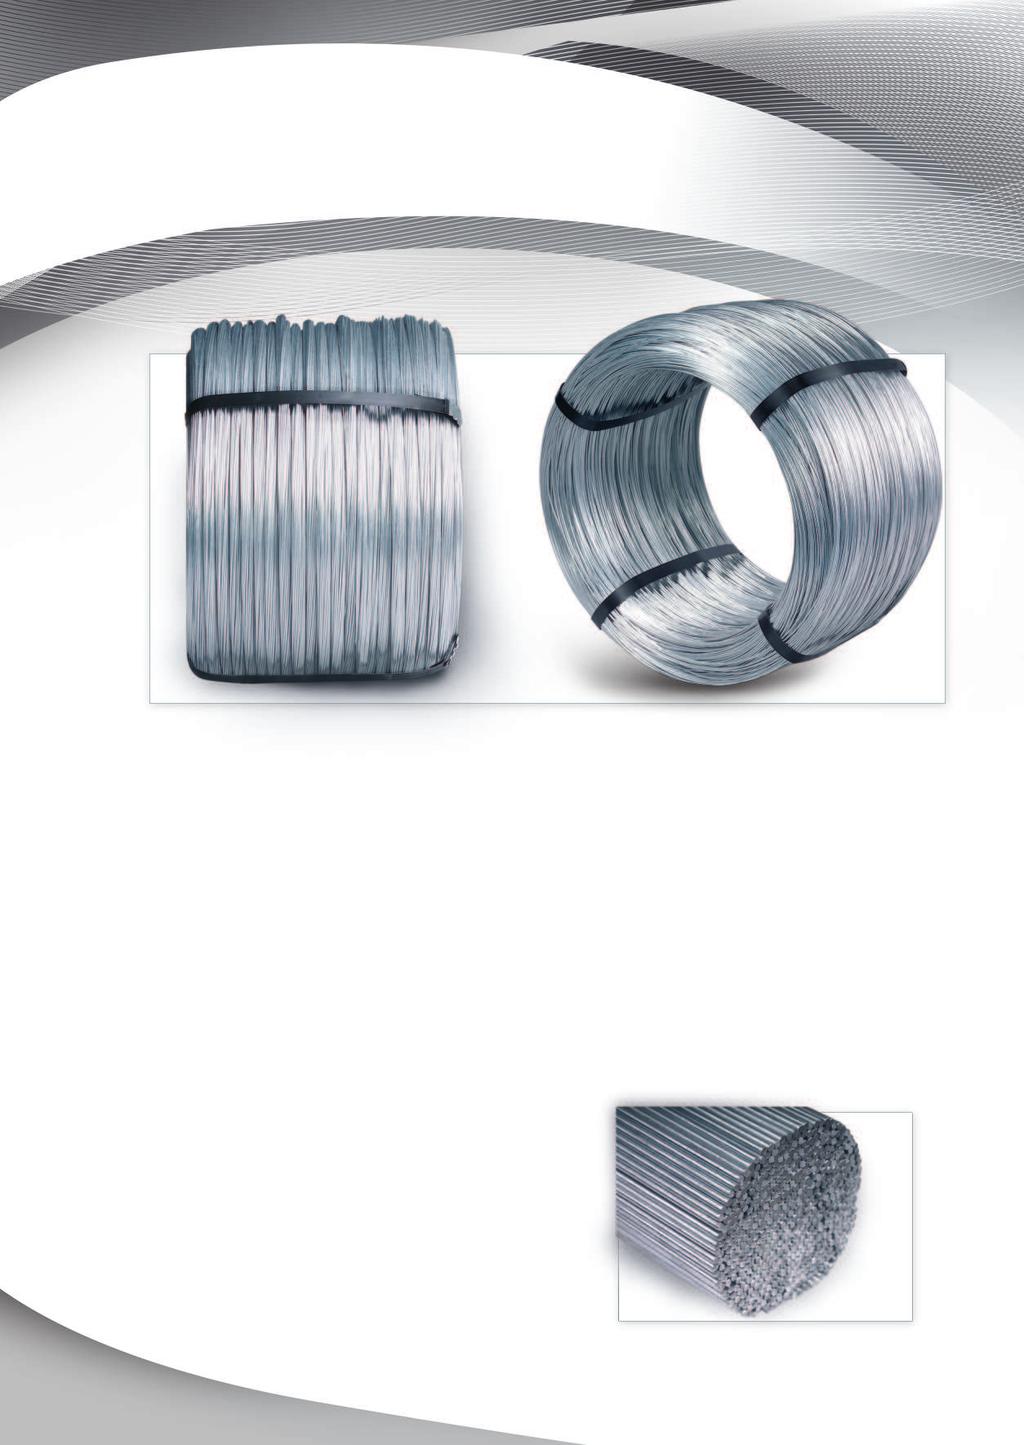 COATED WIRES Material: unalloyed, low-carbon steel according to PN-EN 10016-2; PN-EN 10025; ASTM A 510 M standards Galvanized wires TYPE OF WIRE: soft semi-hard hard WIRE DIAMETER: 0,80 8,00 mm 1,80